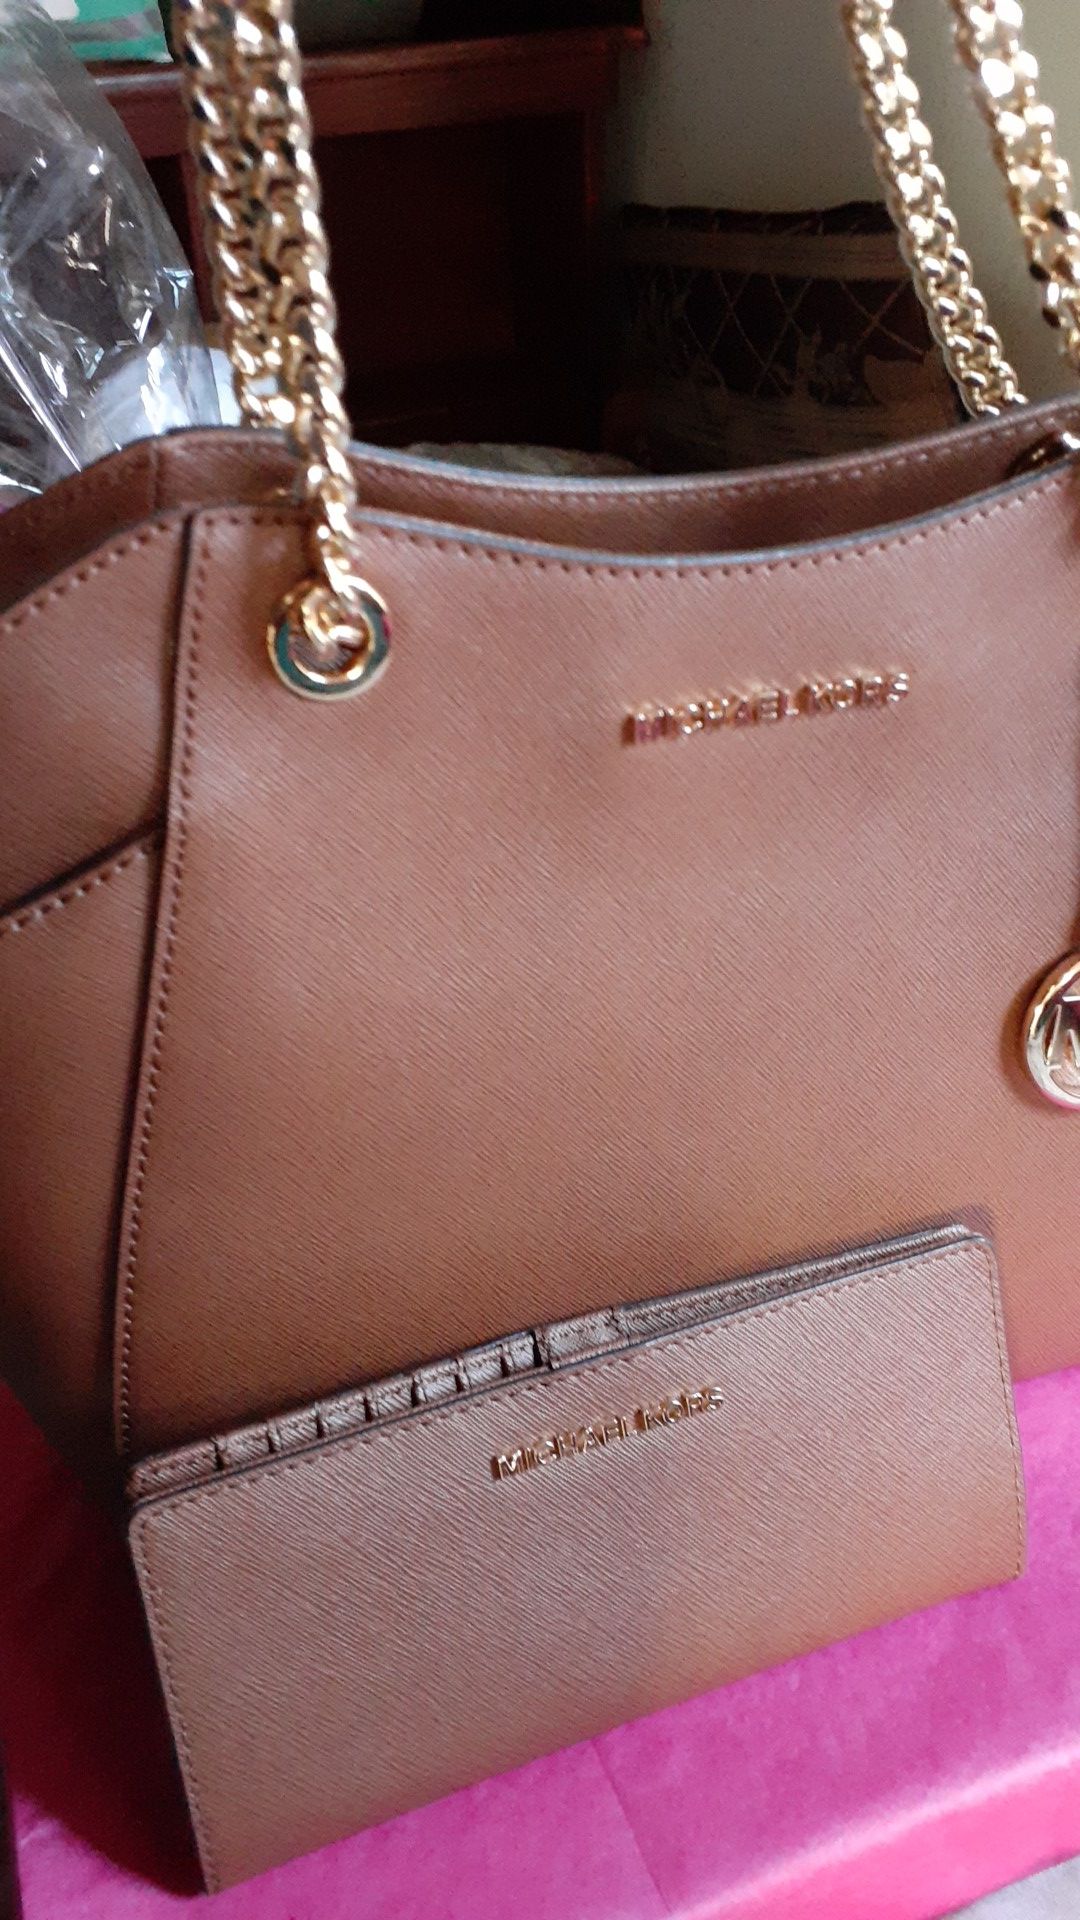 Michael Kors purse and a wallet